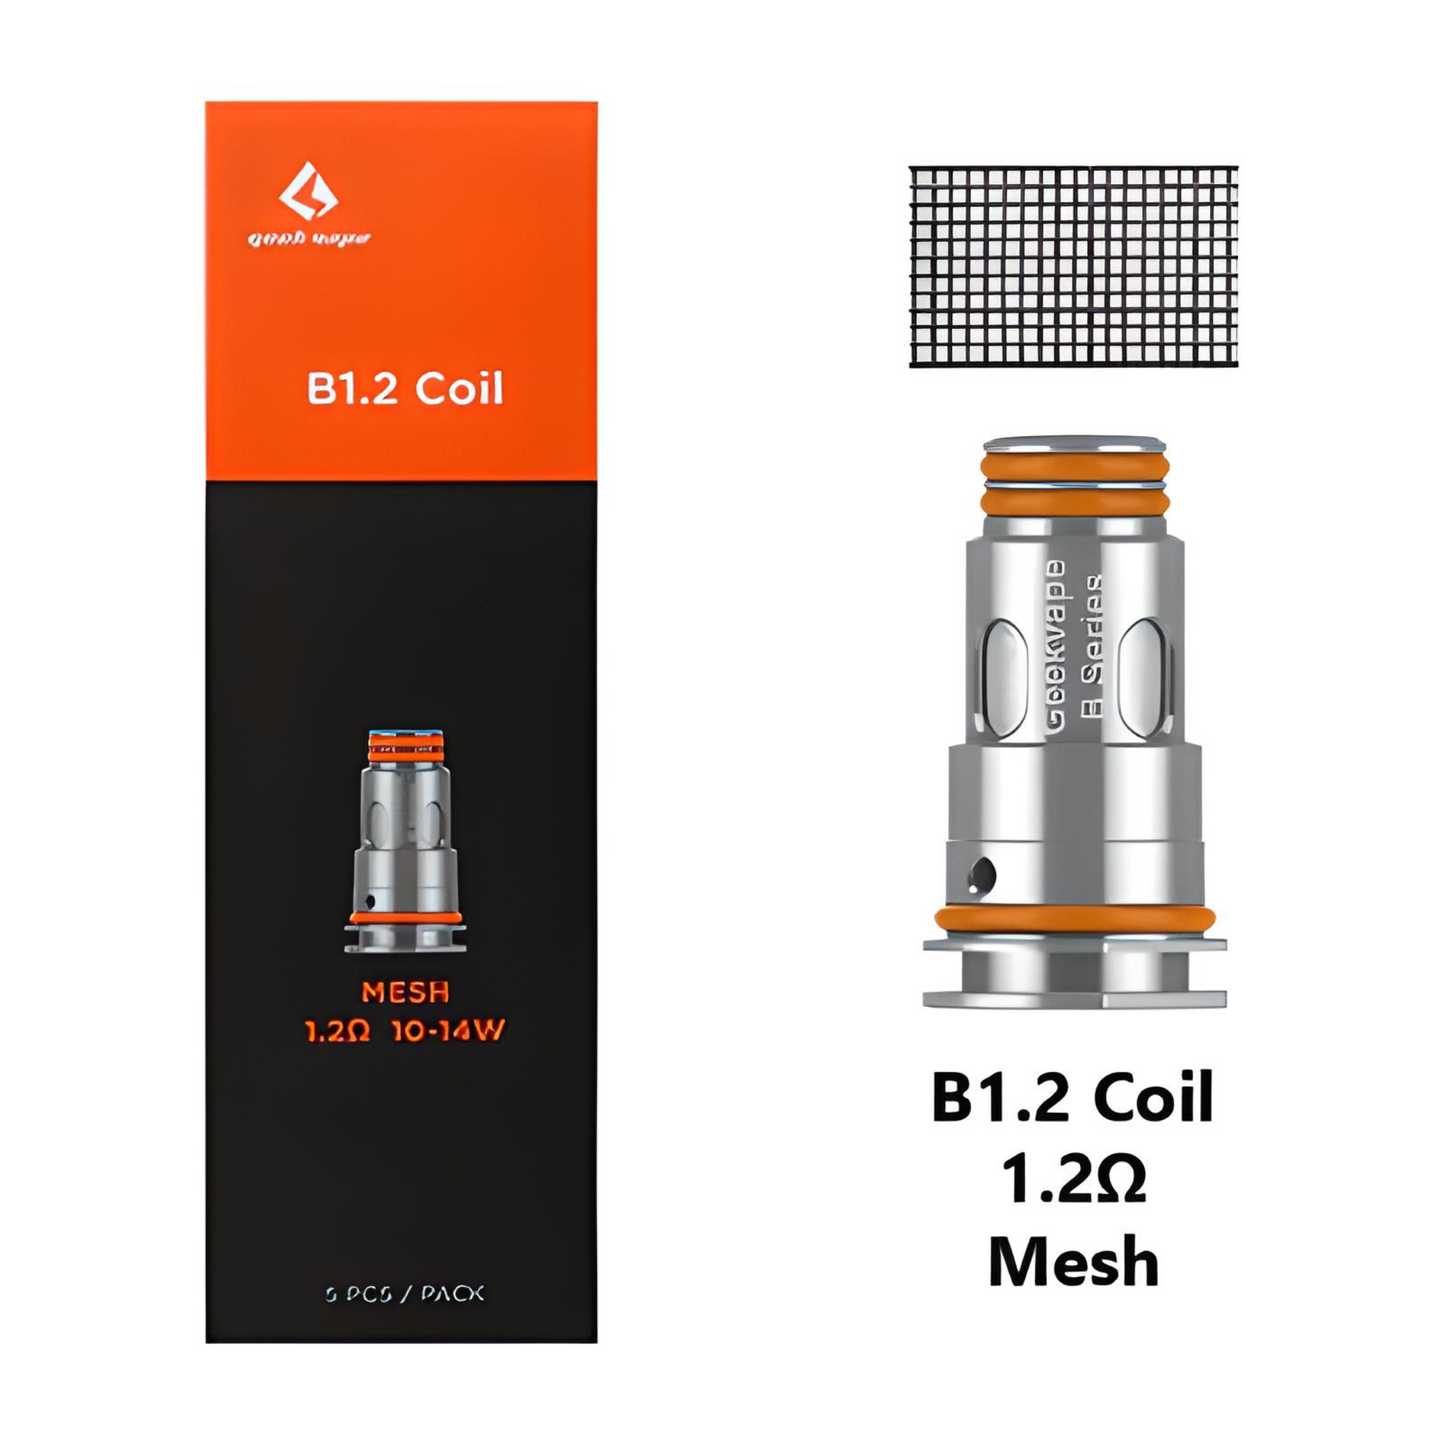 GeekVape Aegis Boost Coils (5-Pack) 1.2ohm with packaging